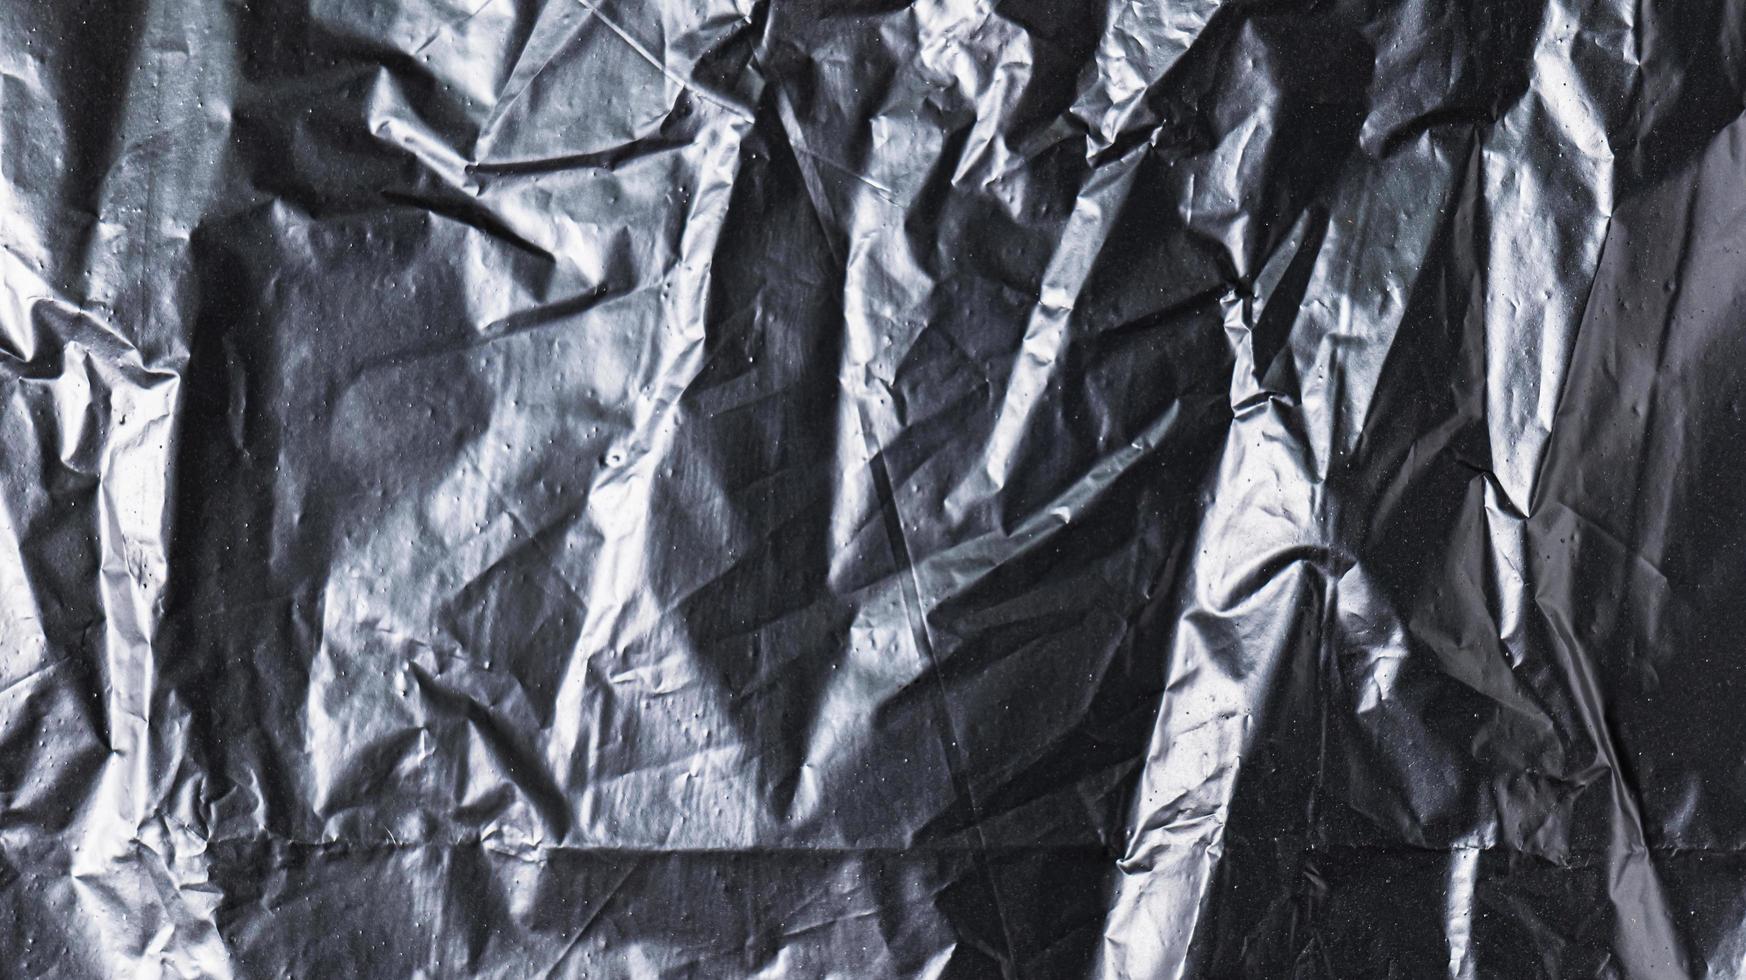 The background image of black plastic trash bags has creases creating a rough texture with light and shadow. photo